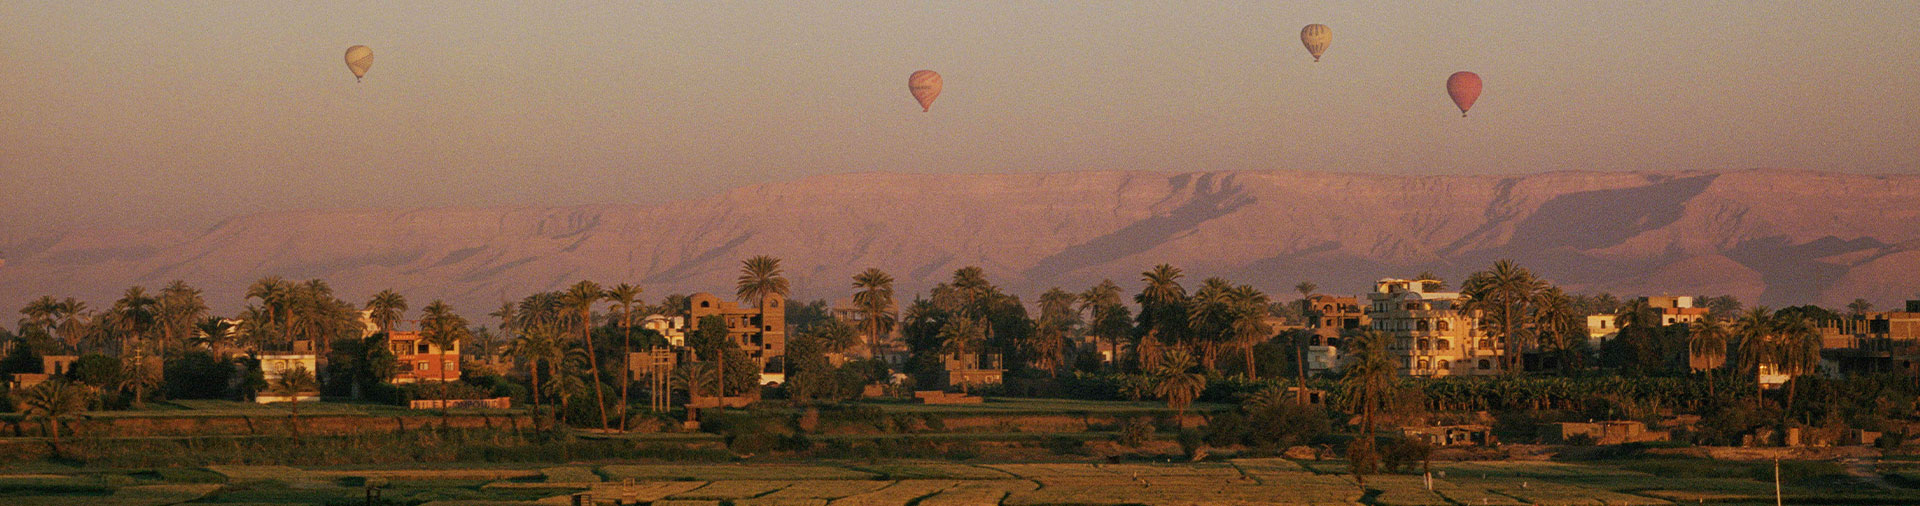 hot-air-balloons-seen-rising-at-sunset-from-across-the-nile-river